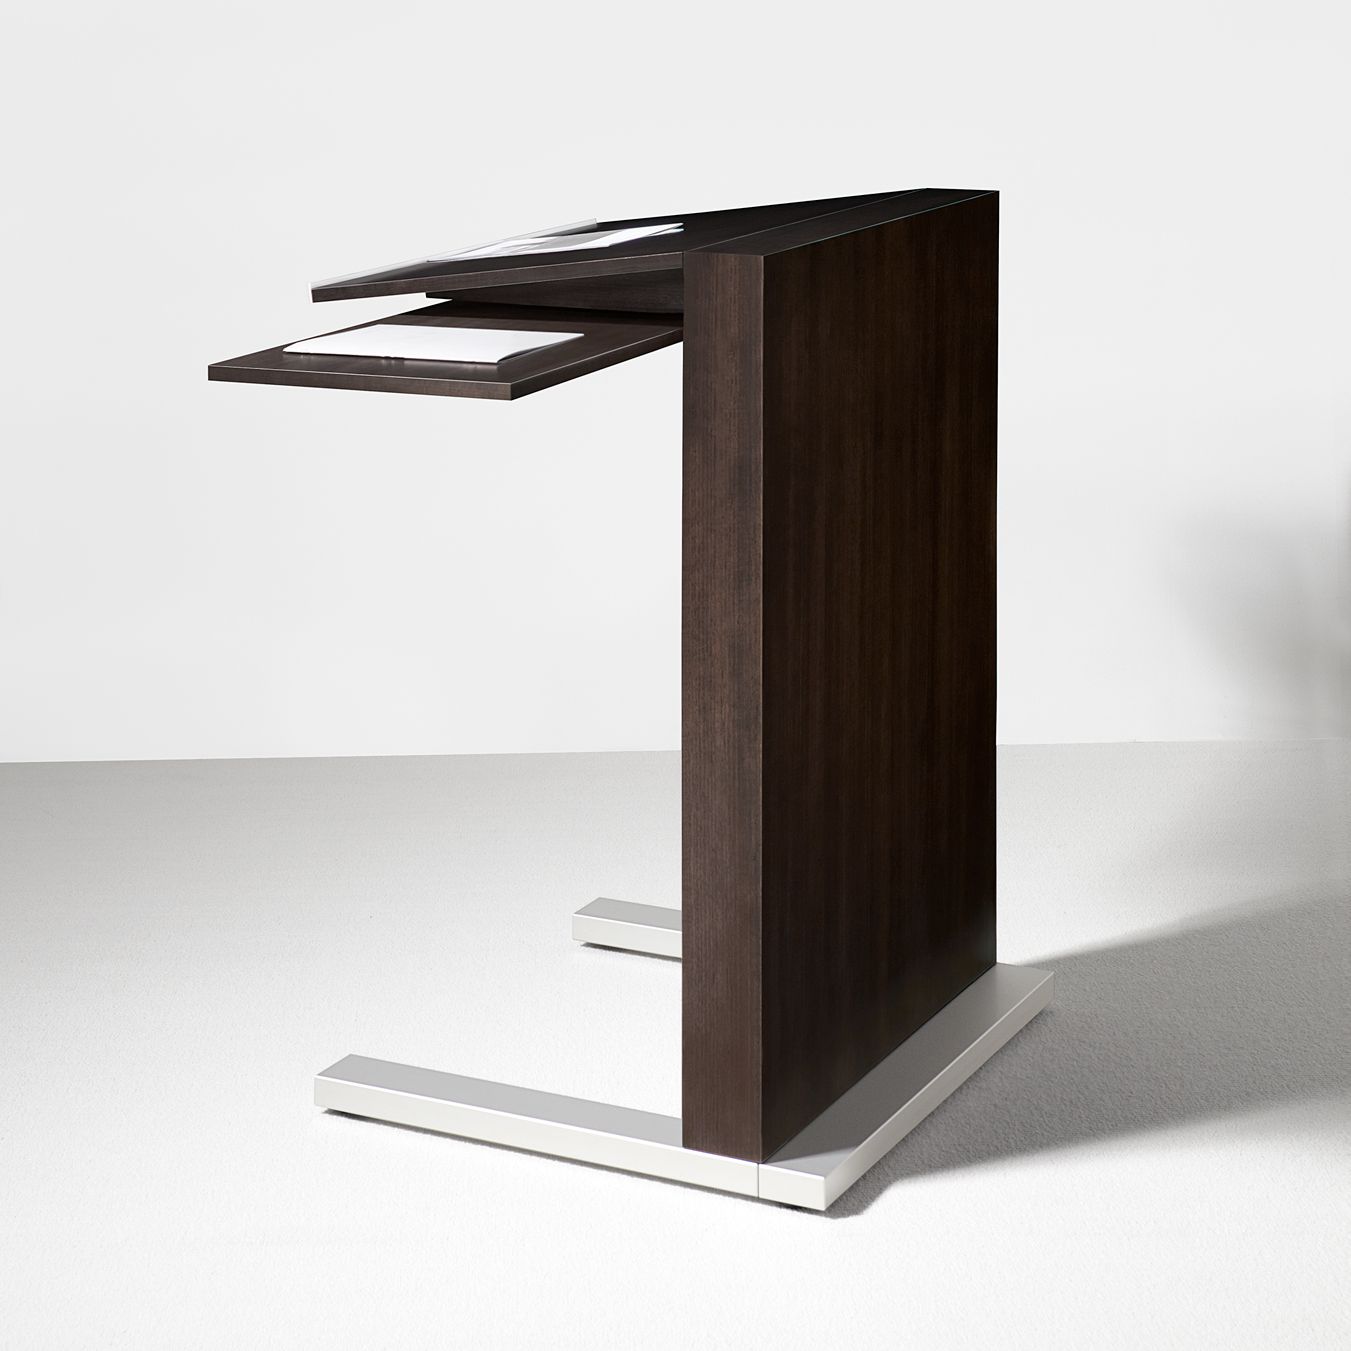 Mobile lecterns are available with an optional swivel shelf.